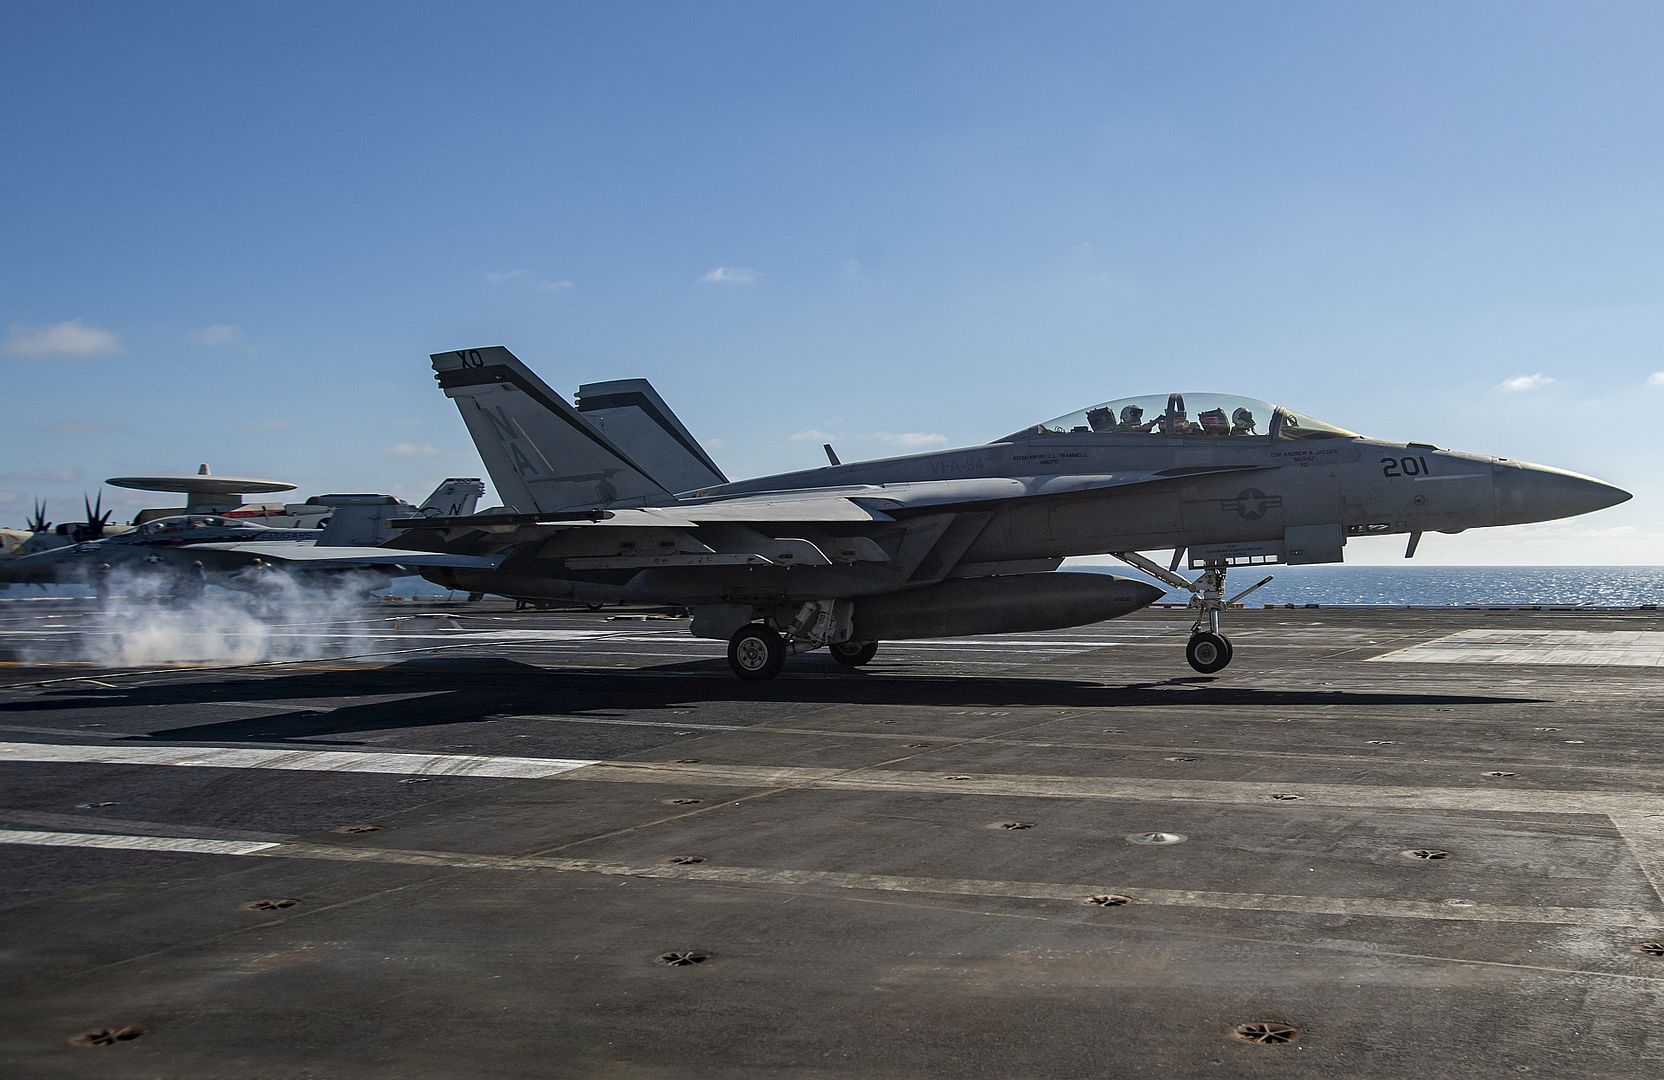  94 Touches Down On The Flight Deck Of The Aircraft Carrier USS Nimitz